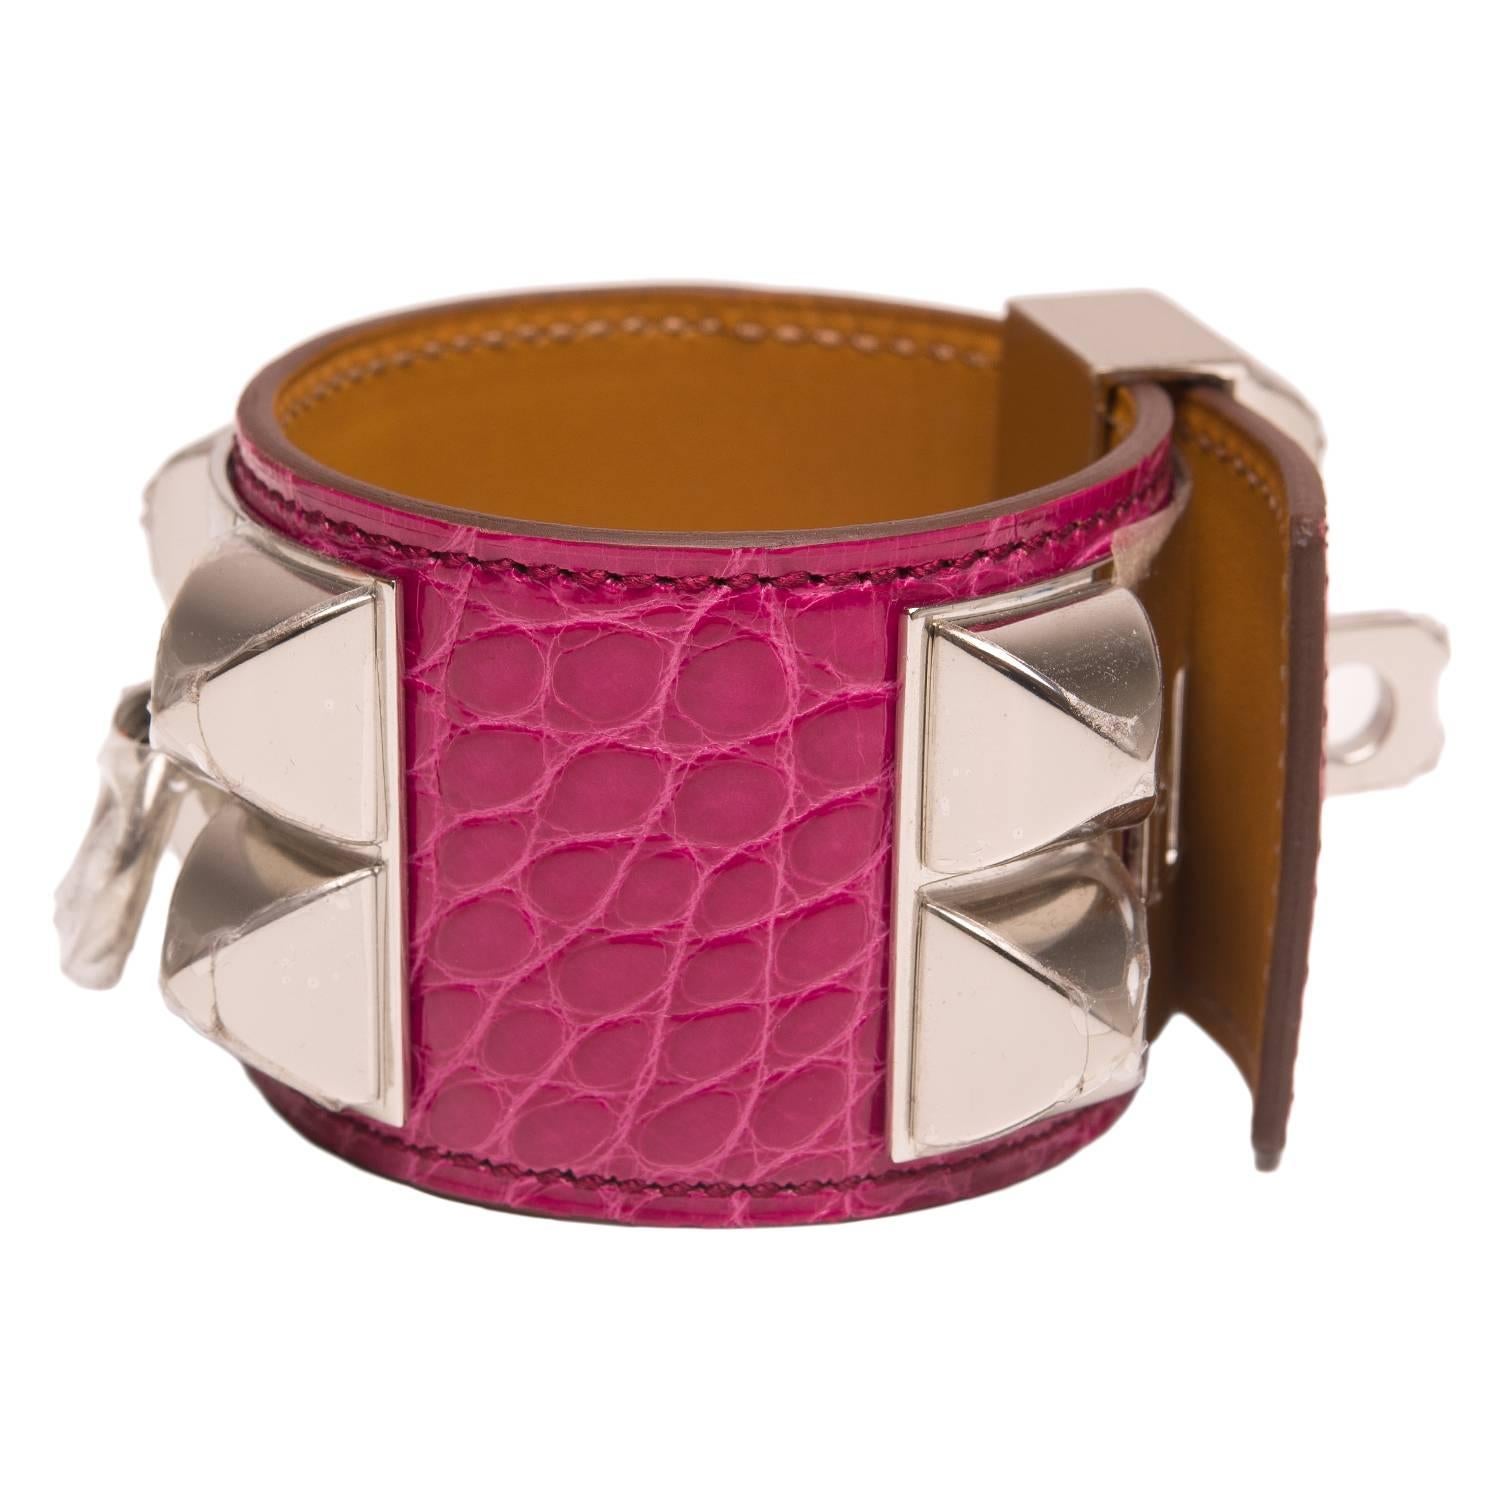 Hermes Limited Edition Collier de Chien (CDC) in Rose Scheherazade shiny alligator with palladium plated hardware in size small.

This style features palladium pyramid studs, center ring and adjustable push lock closure.

Origin: France

Condition: